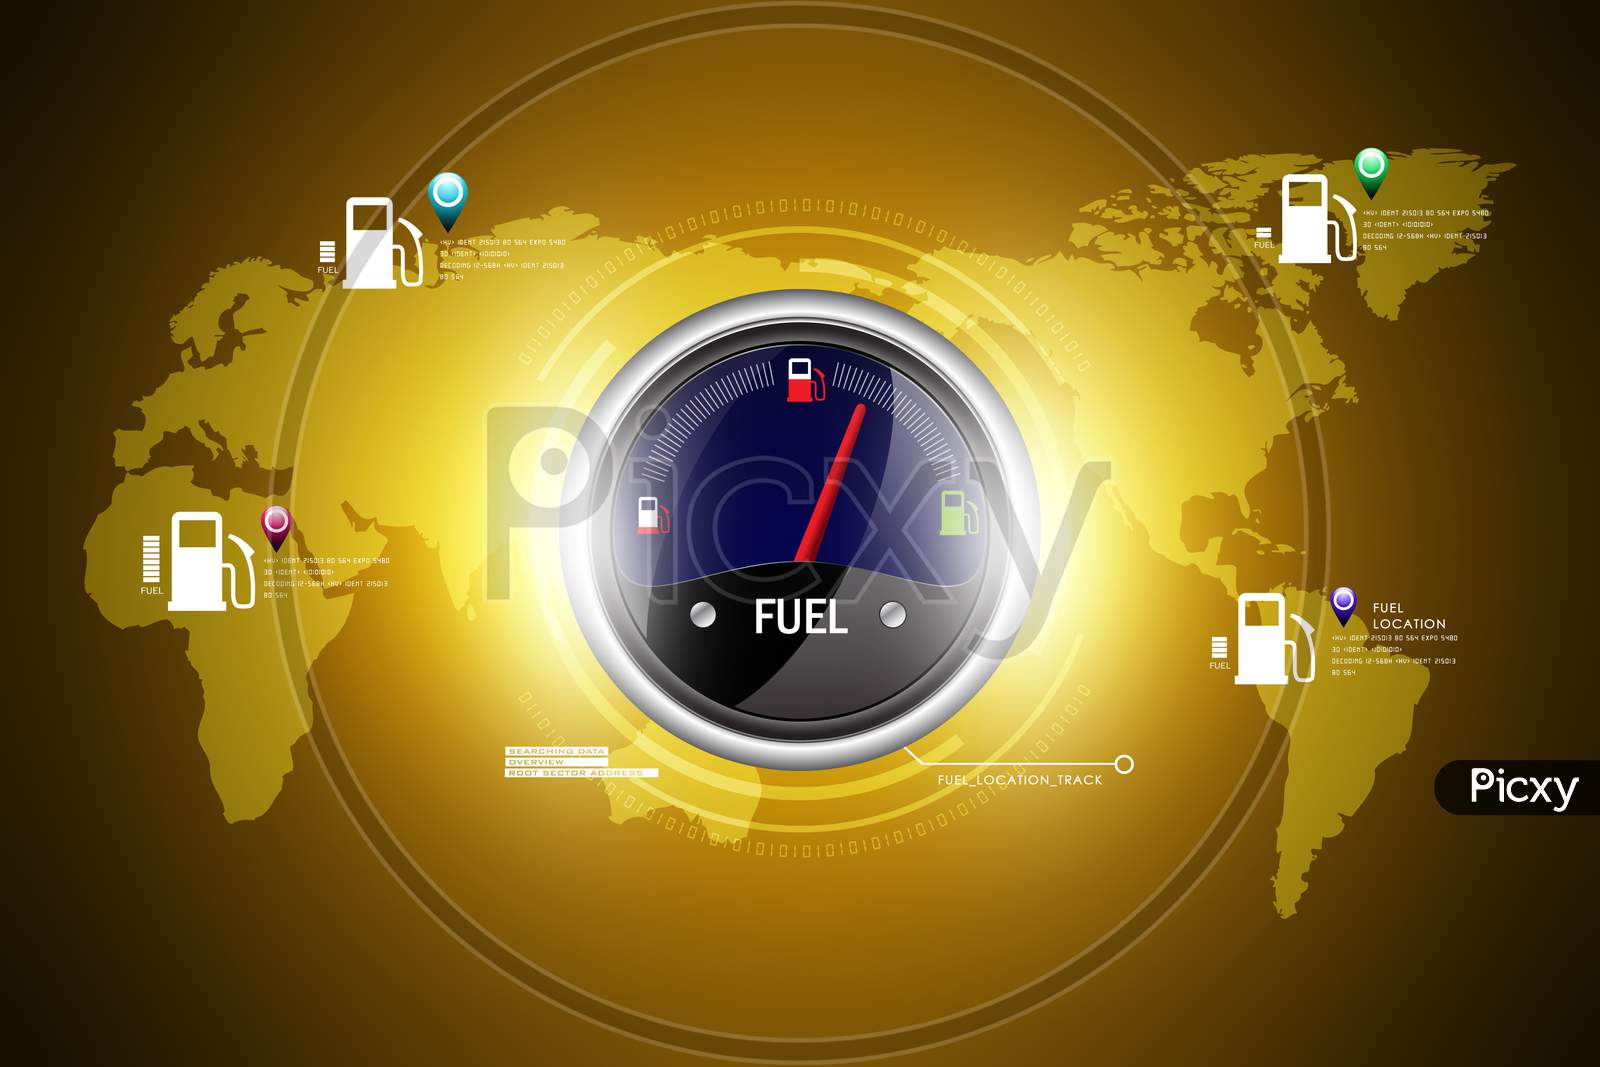 A Fuel Indicator with World Map in the Background